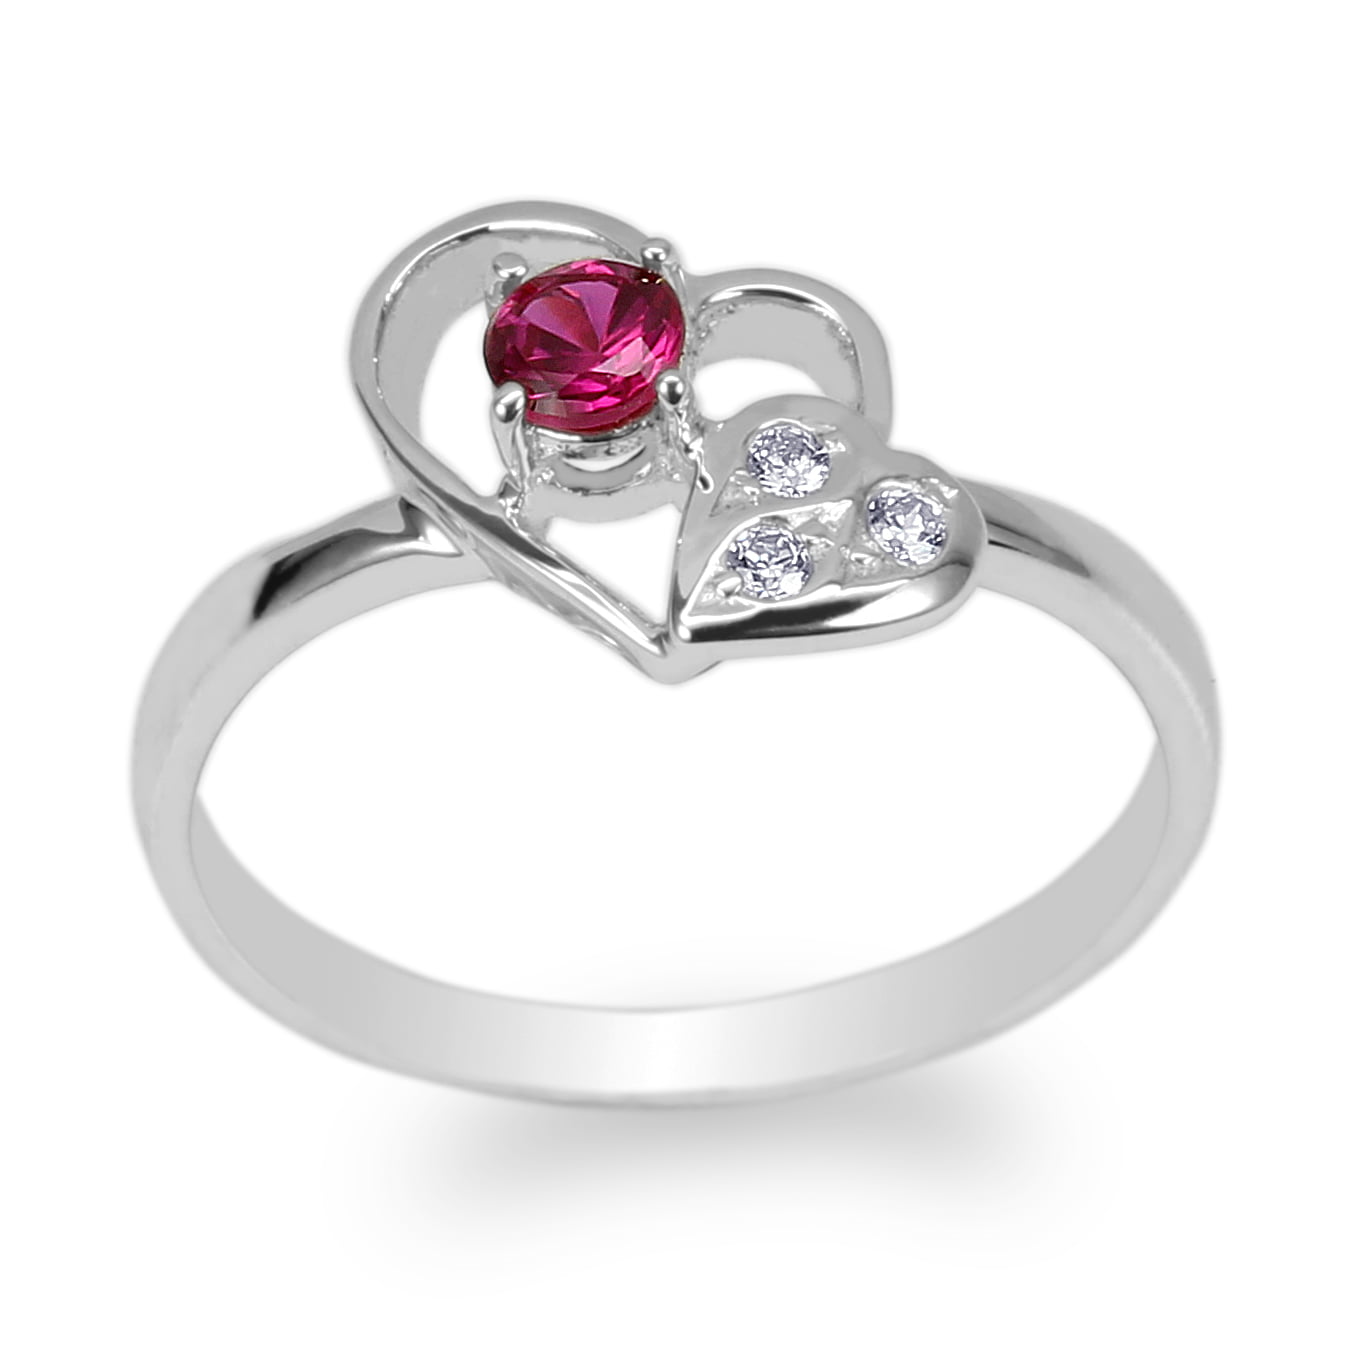 LOVE w/ Cz Stone .925 Sterling Silver Ring Sizes 4-10